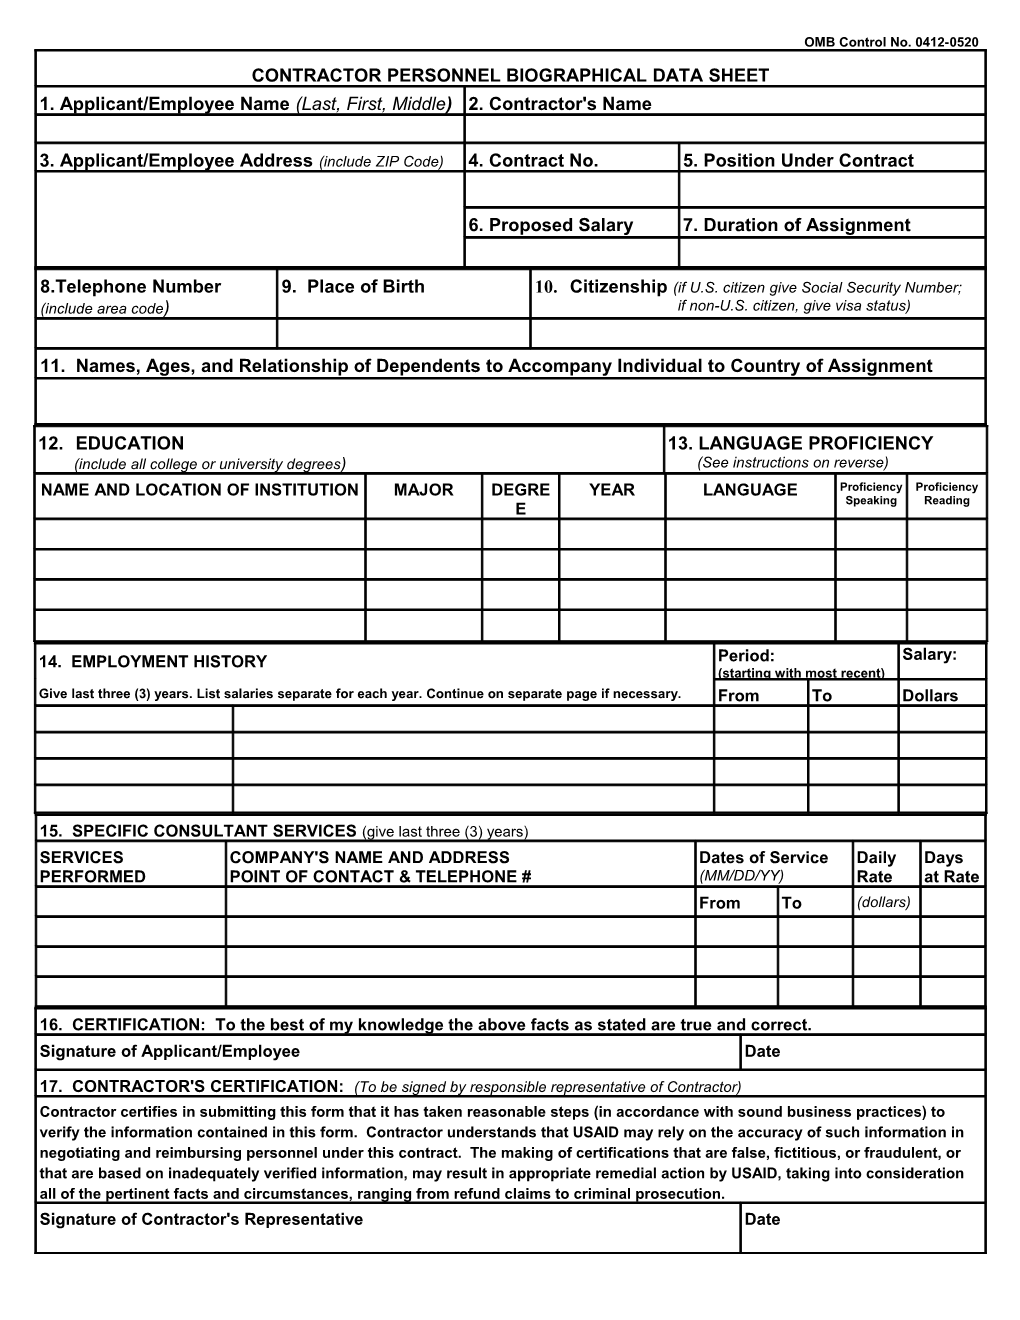 Contractor Personnel Biographical Data Sheet